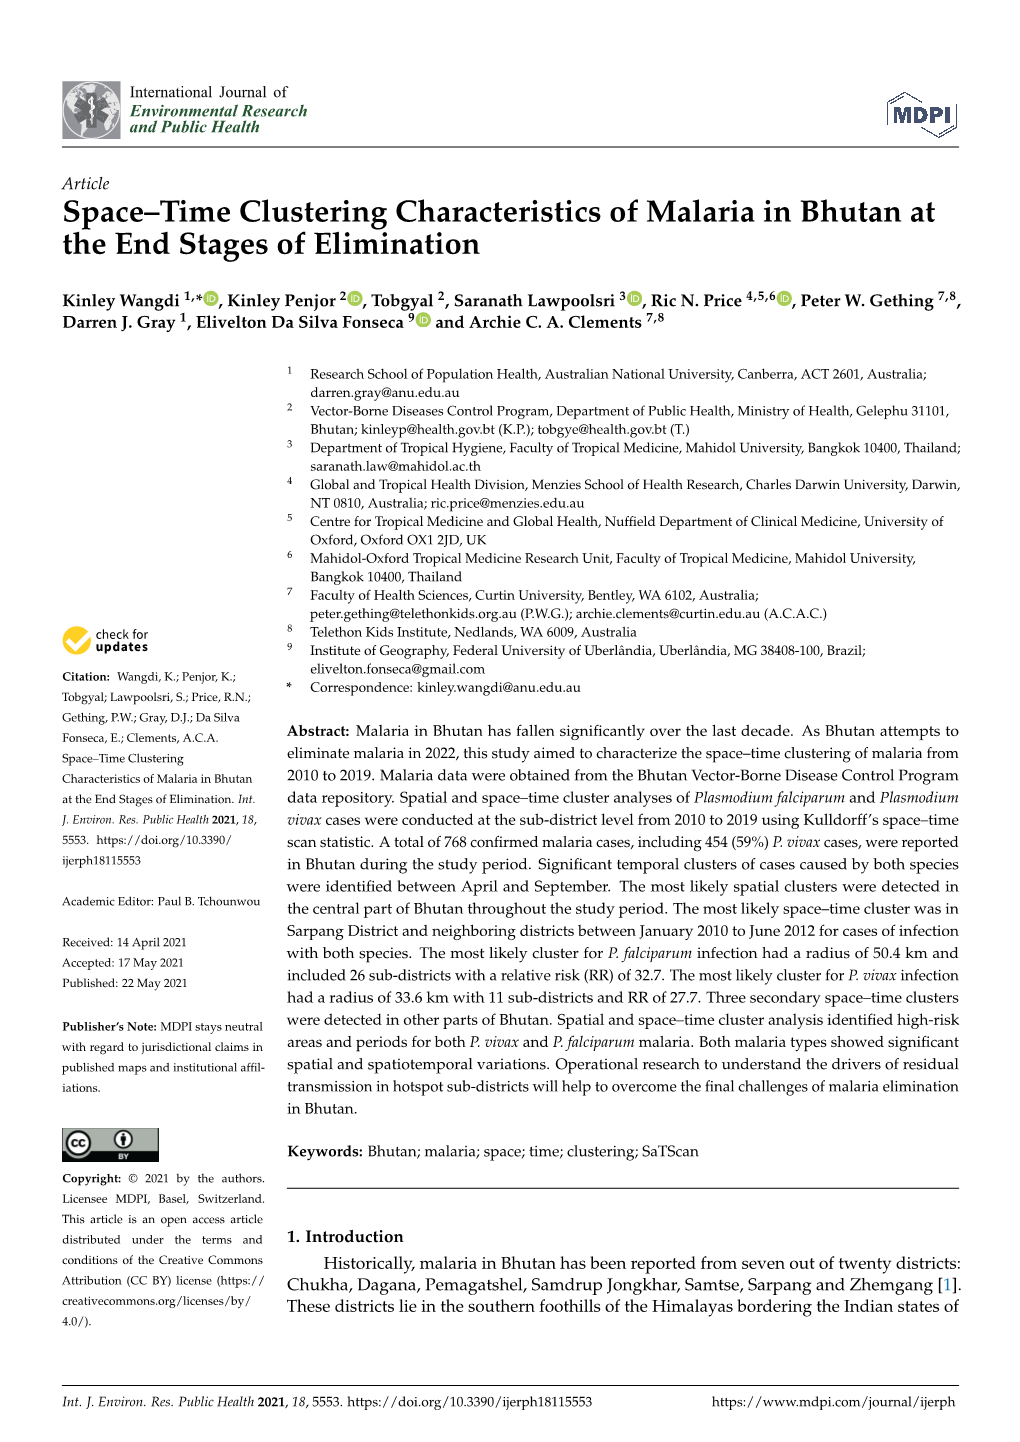 Space–Time Clustering Characteristics of Malaria in Bhutan at the End Stages of Elimination